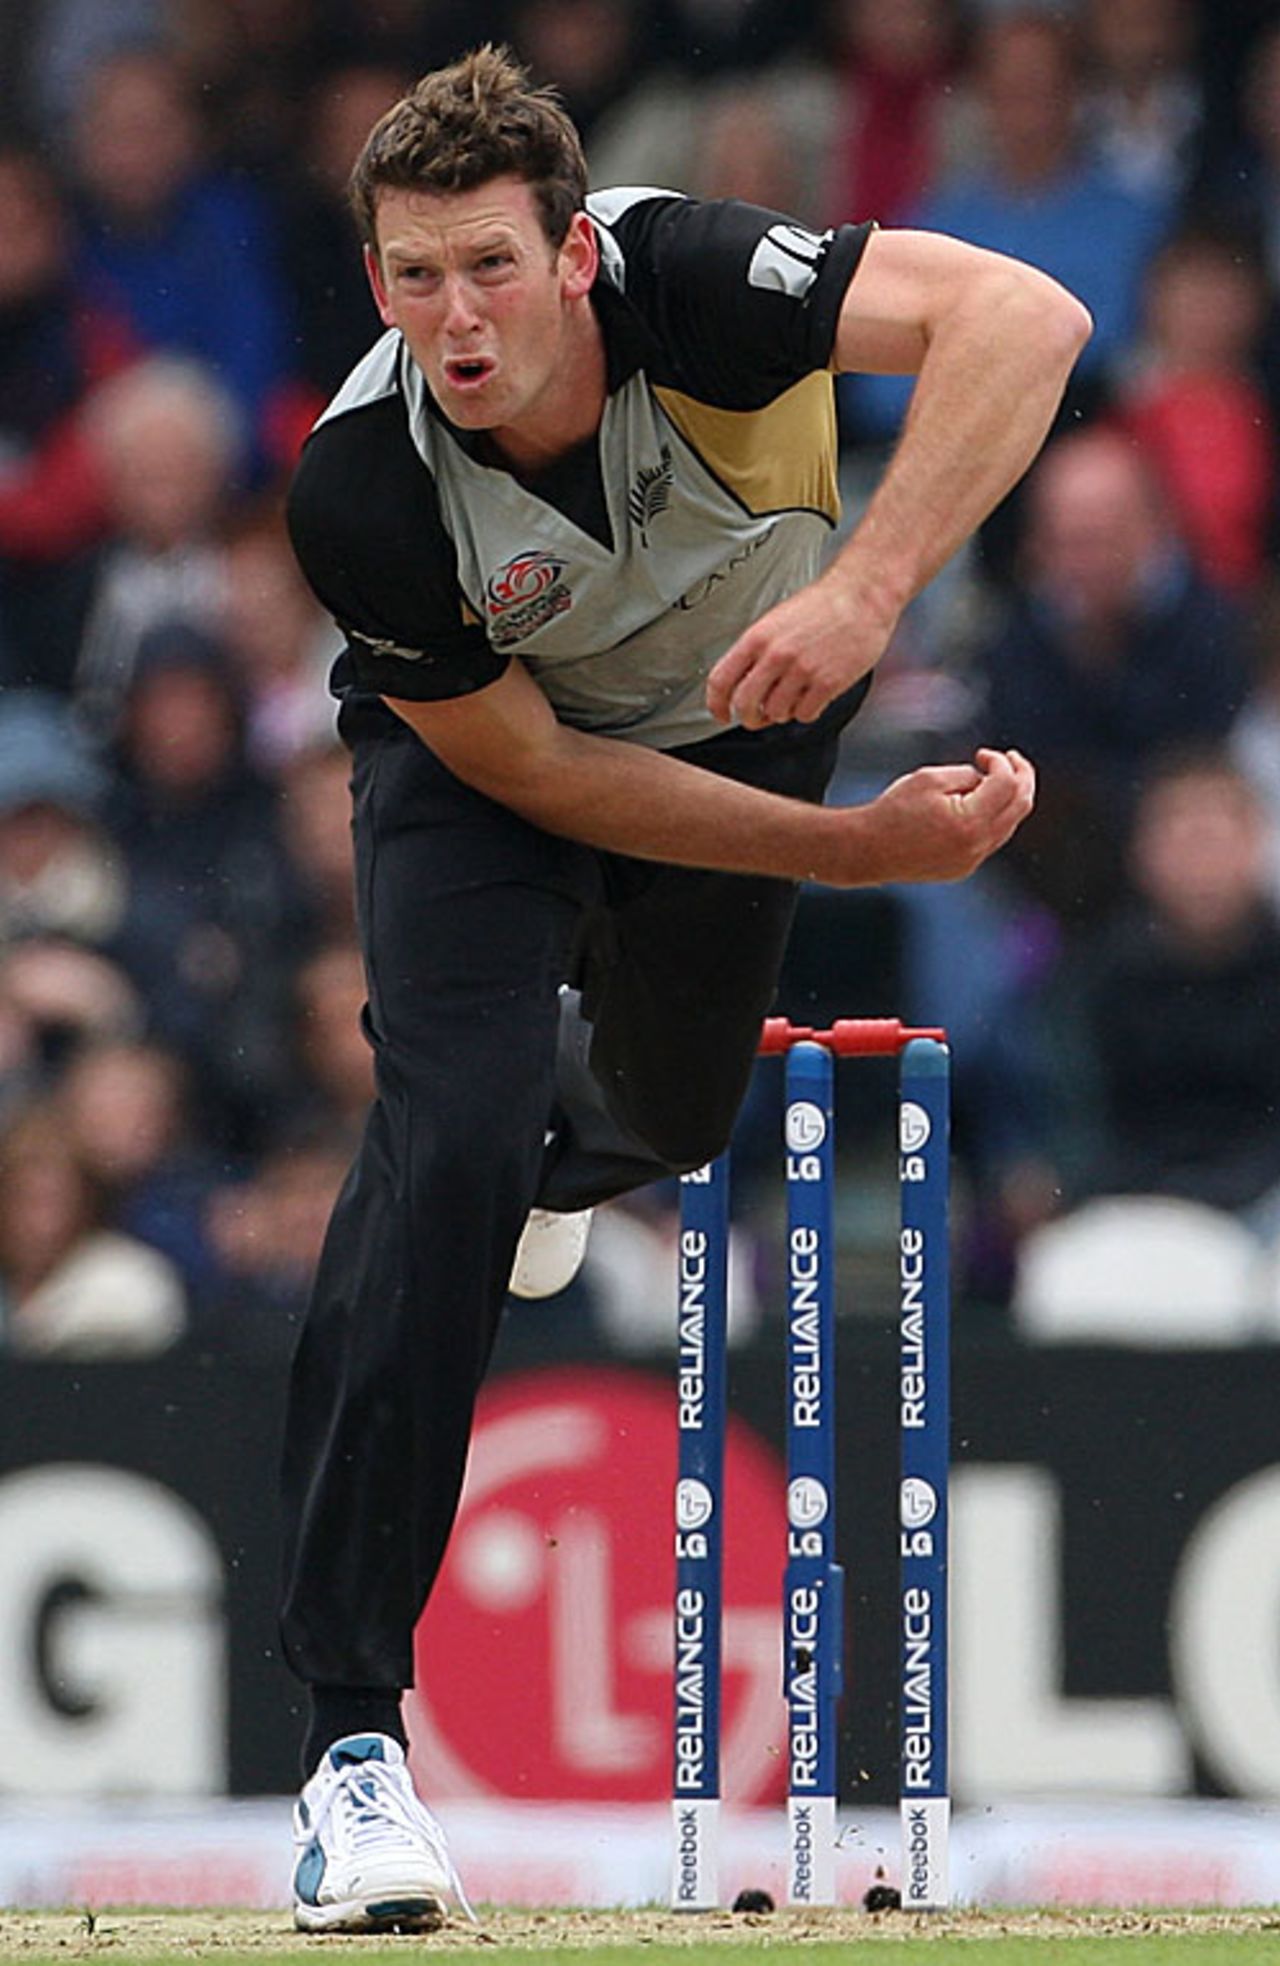 Ian Butler was New Zealand's best bowler with 3 for 19, New Zealand v Scotland, ICC World Twenty20, The Oval, June 6, 2009